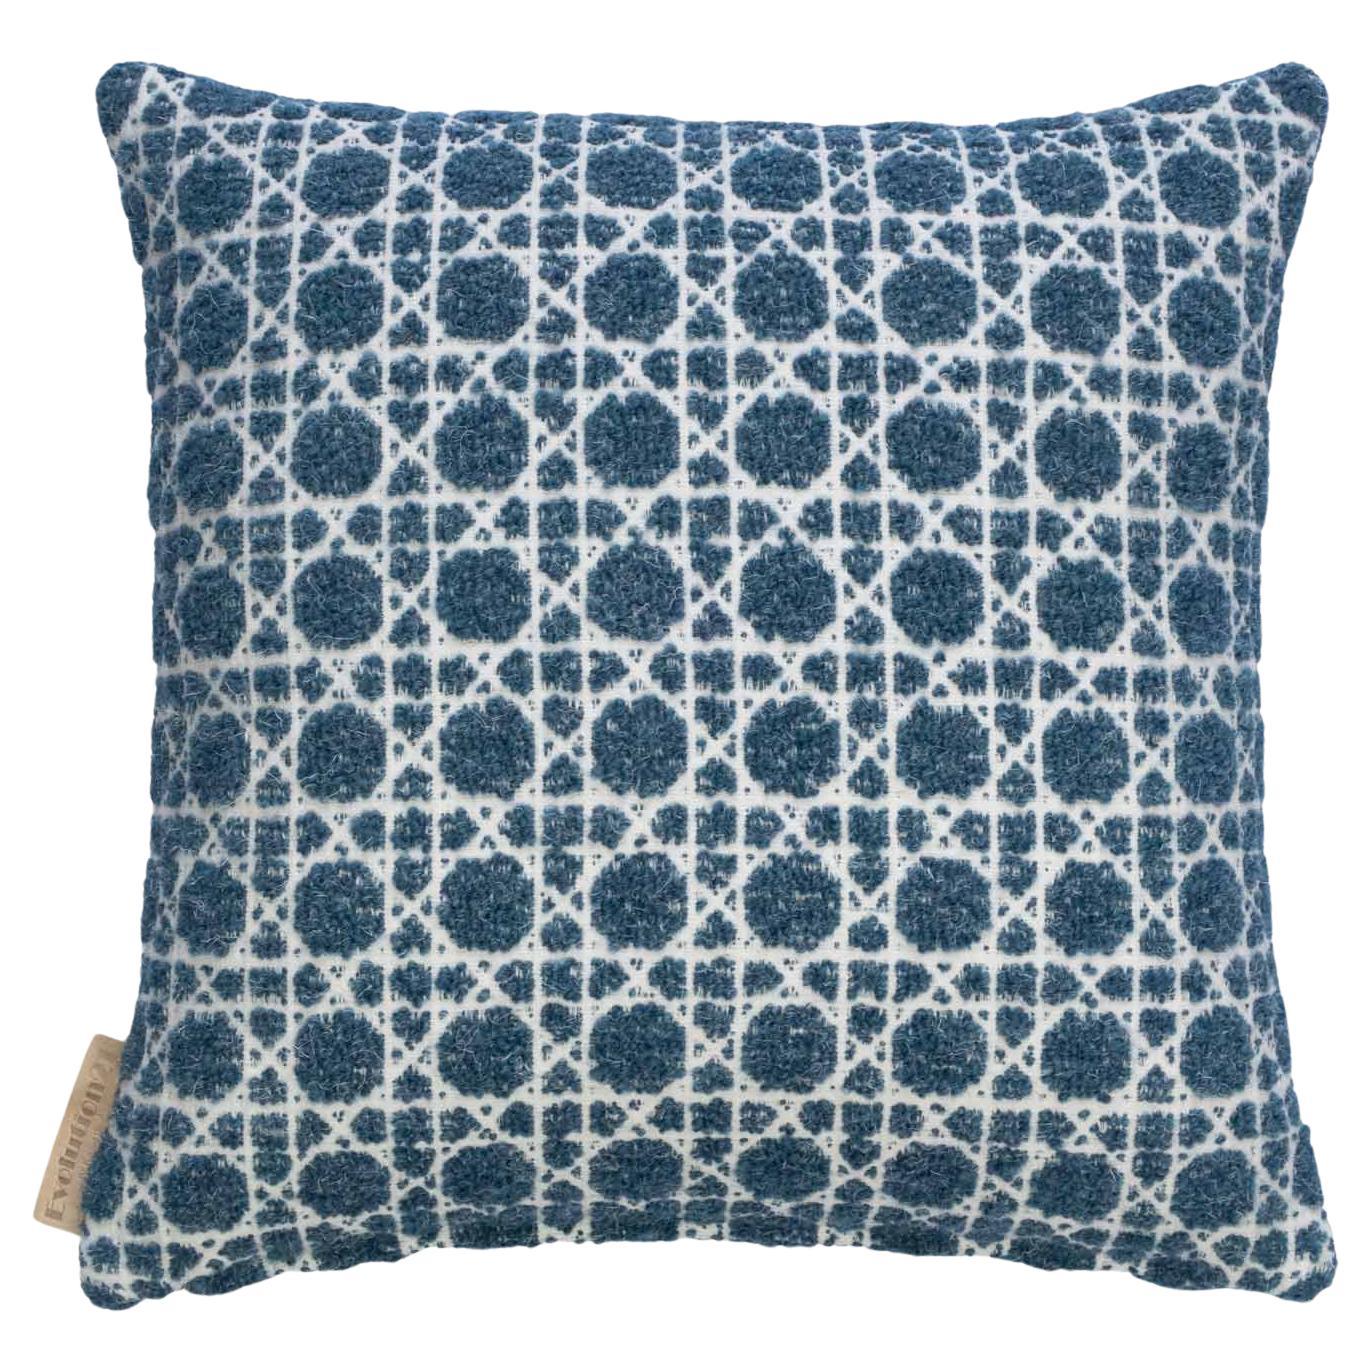 Modern Textured Patterned Throw Pillow Blue "Cannage" by Evolution21 For Sale